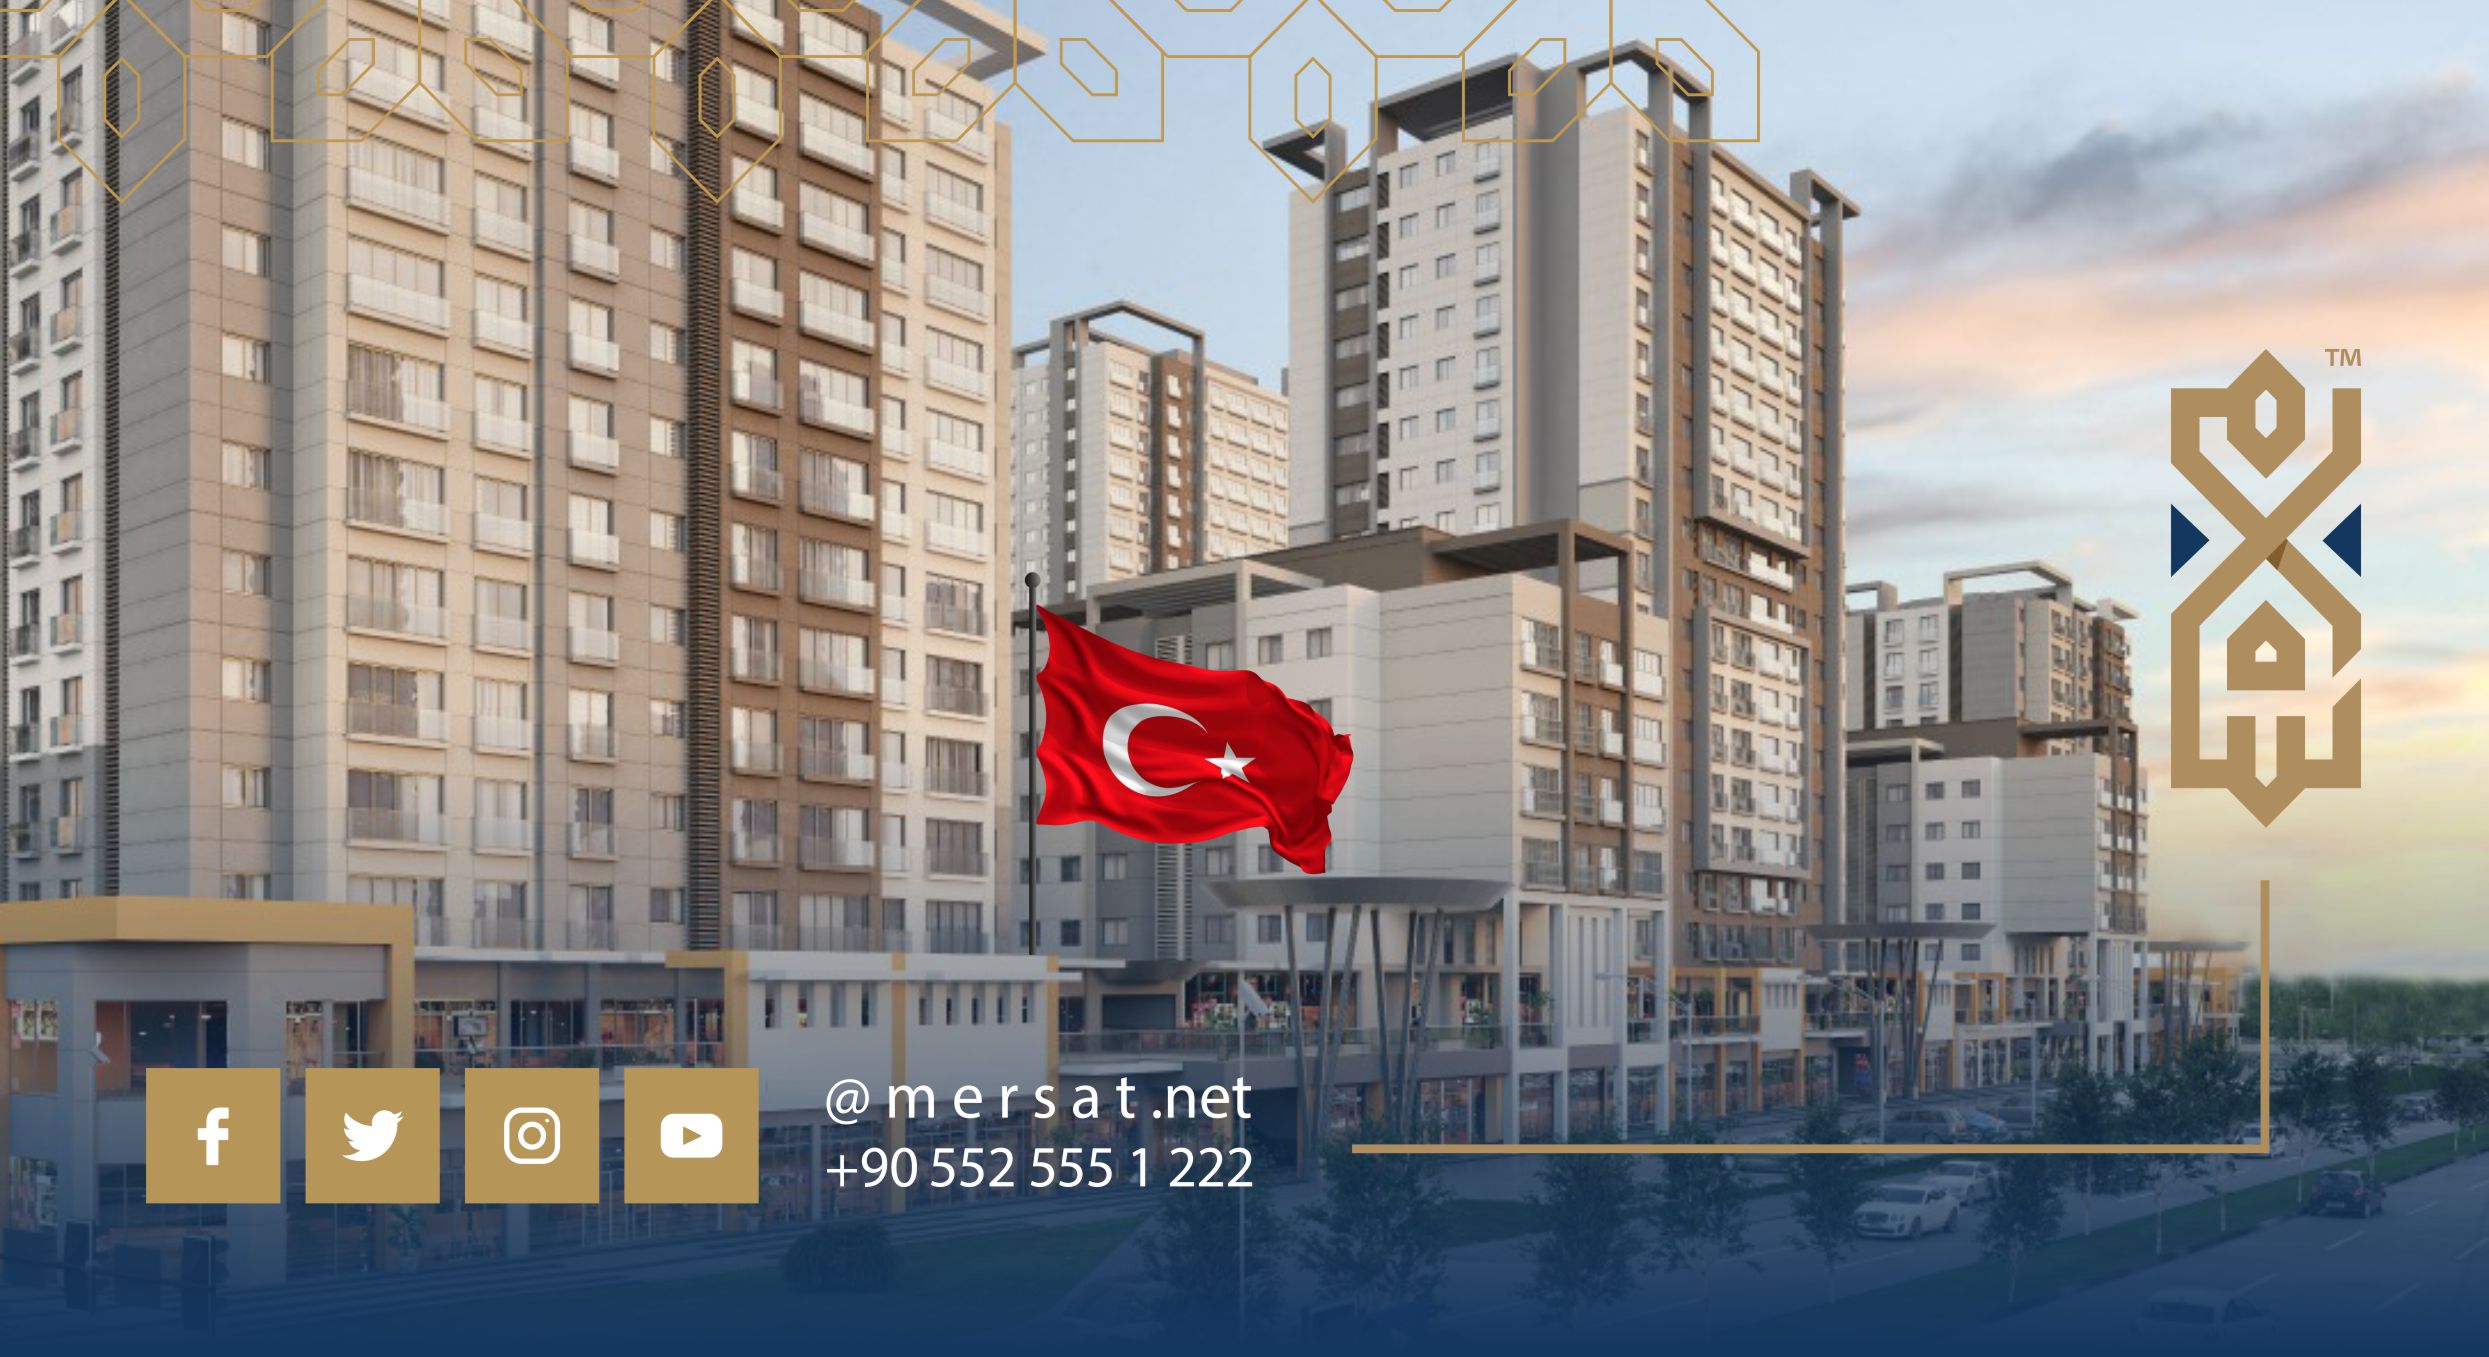 Turkey real estate guaranteed by the Turkish government